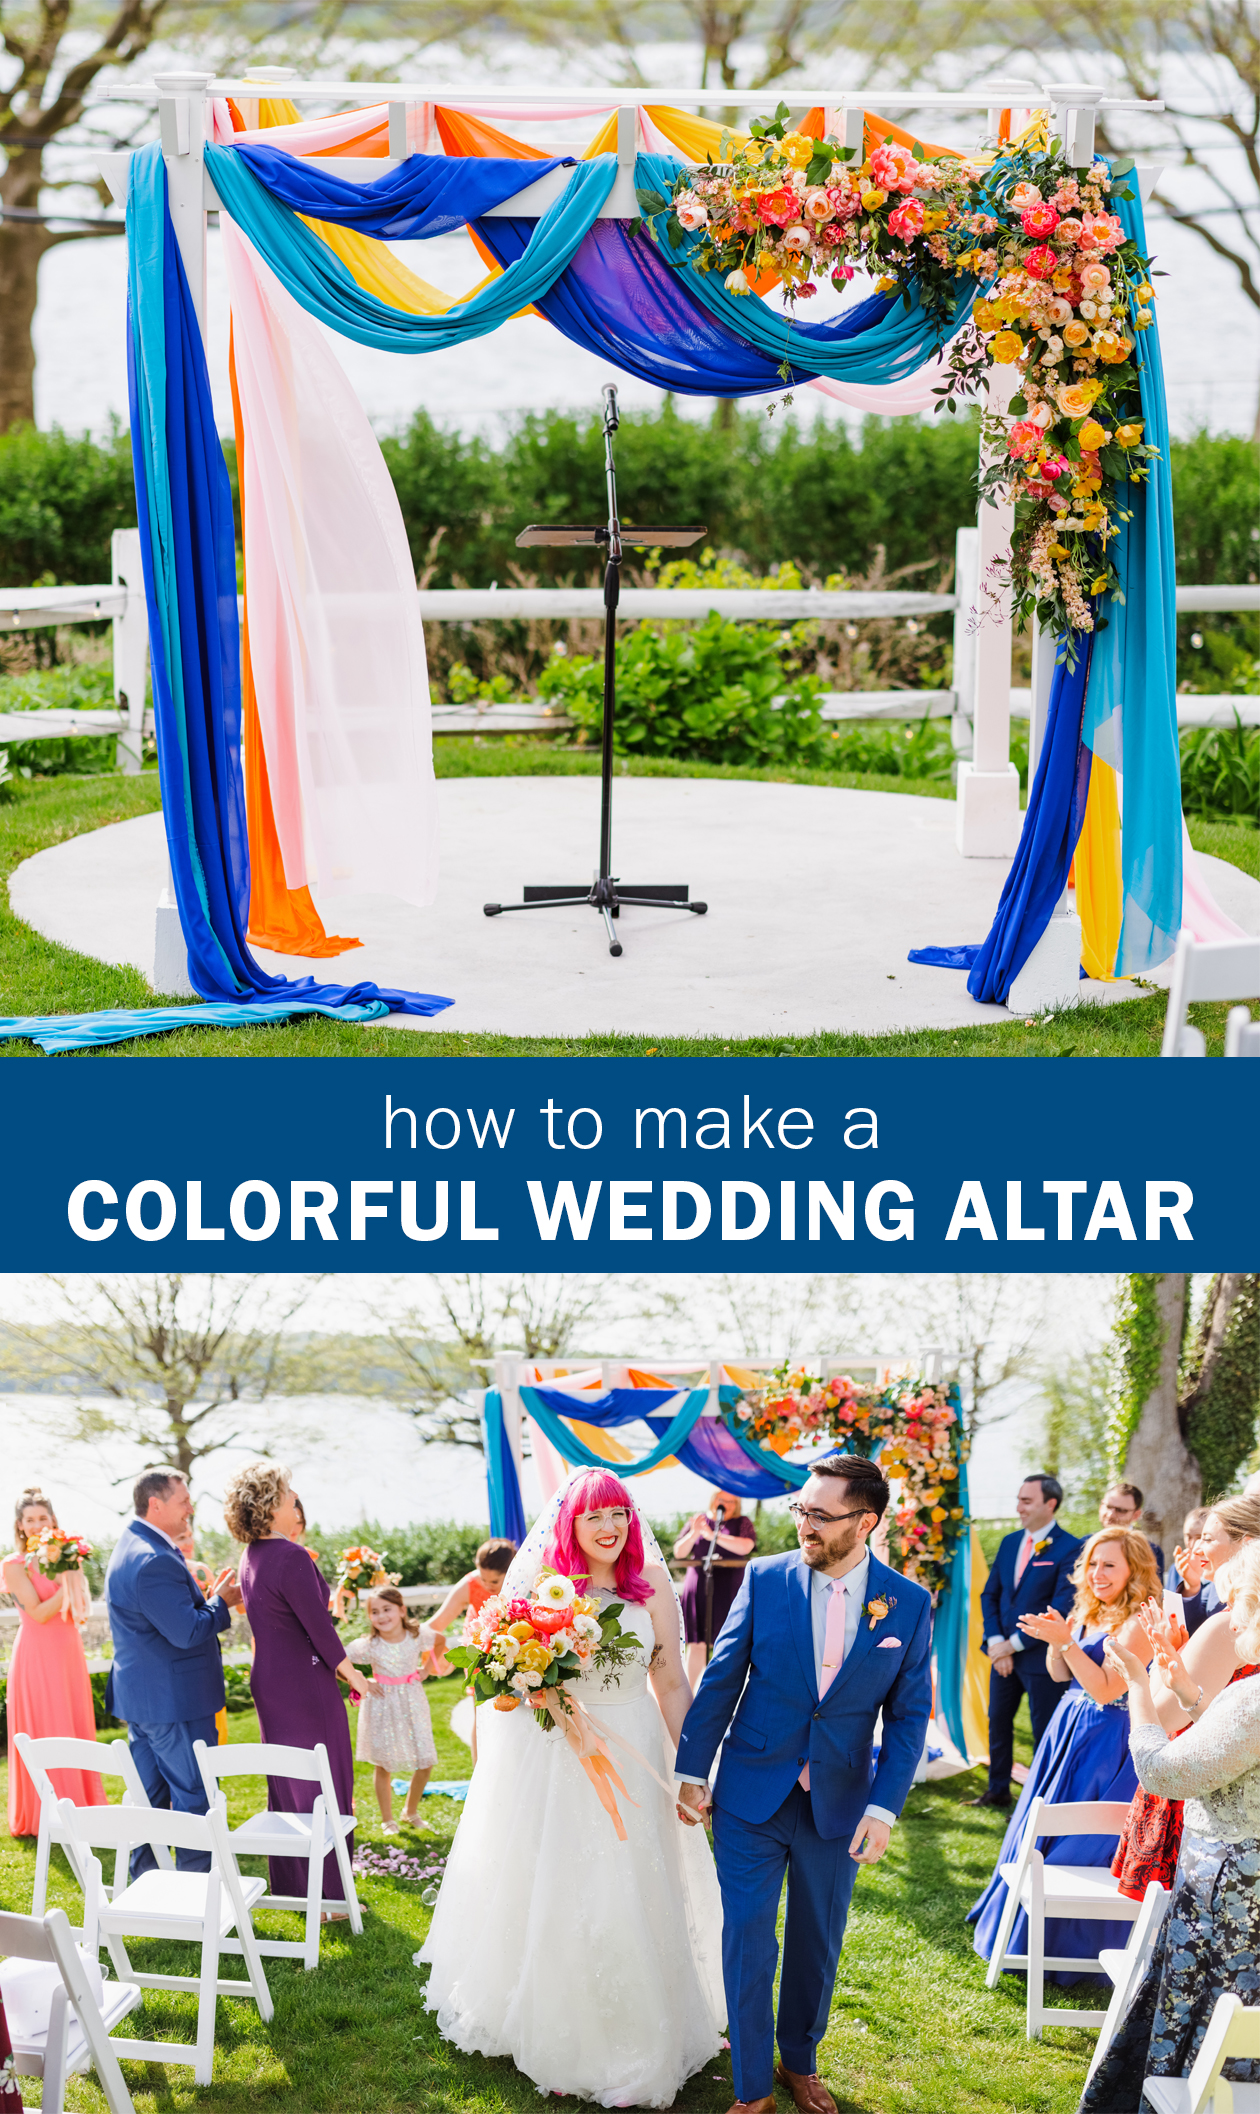 How to Make a Wedding Altar to add a pop of color to your wedding ceramony!